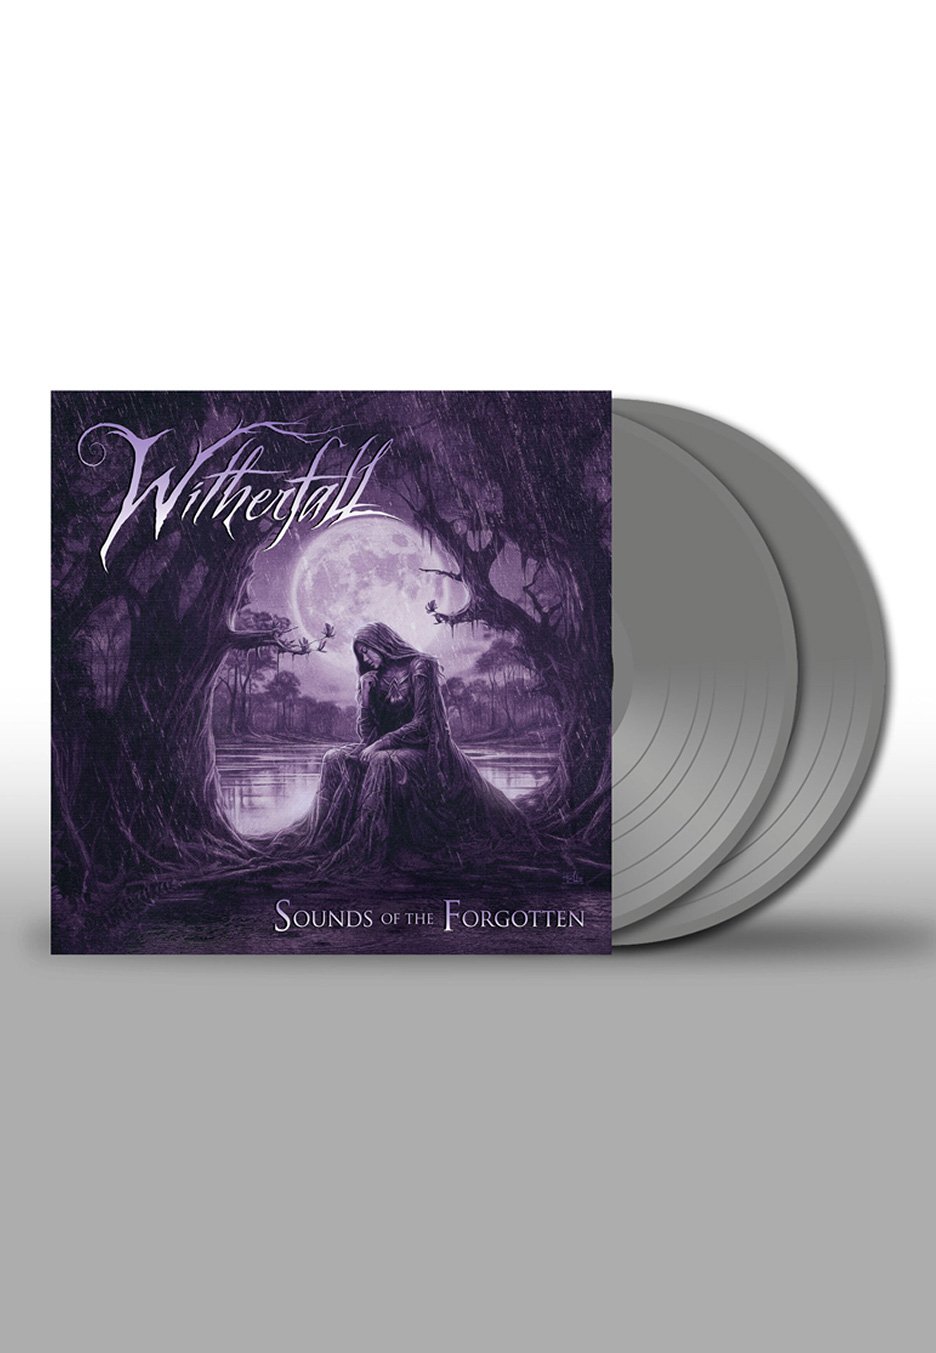 Witherfall - Sounds Of The Forgotten Ltd. Grey - Colored 2 Vinyl